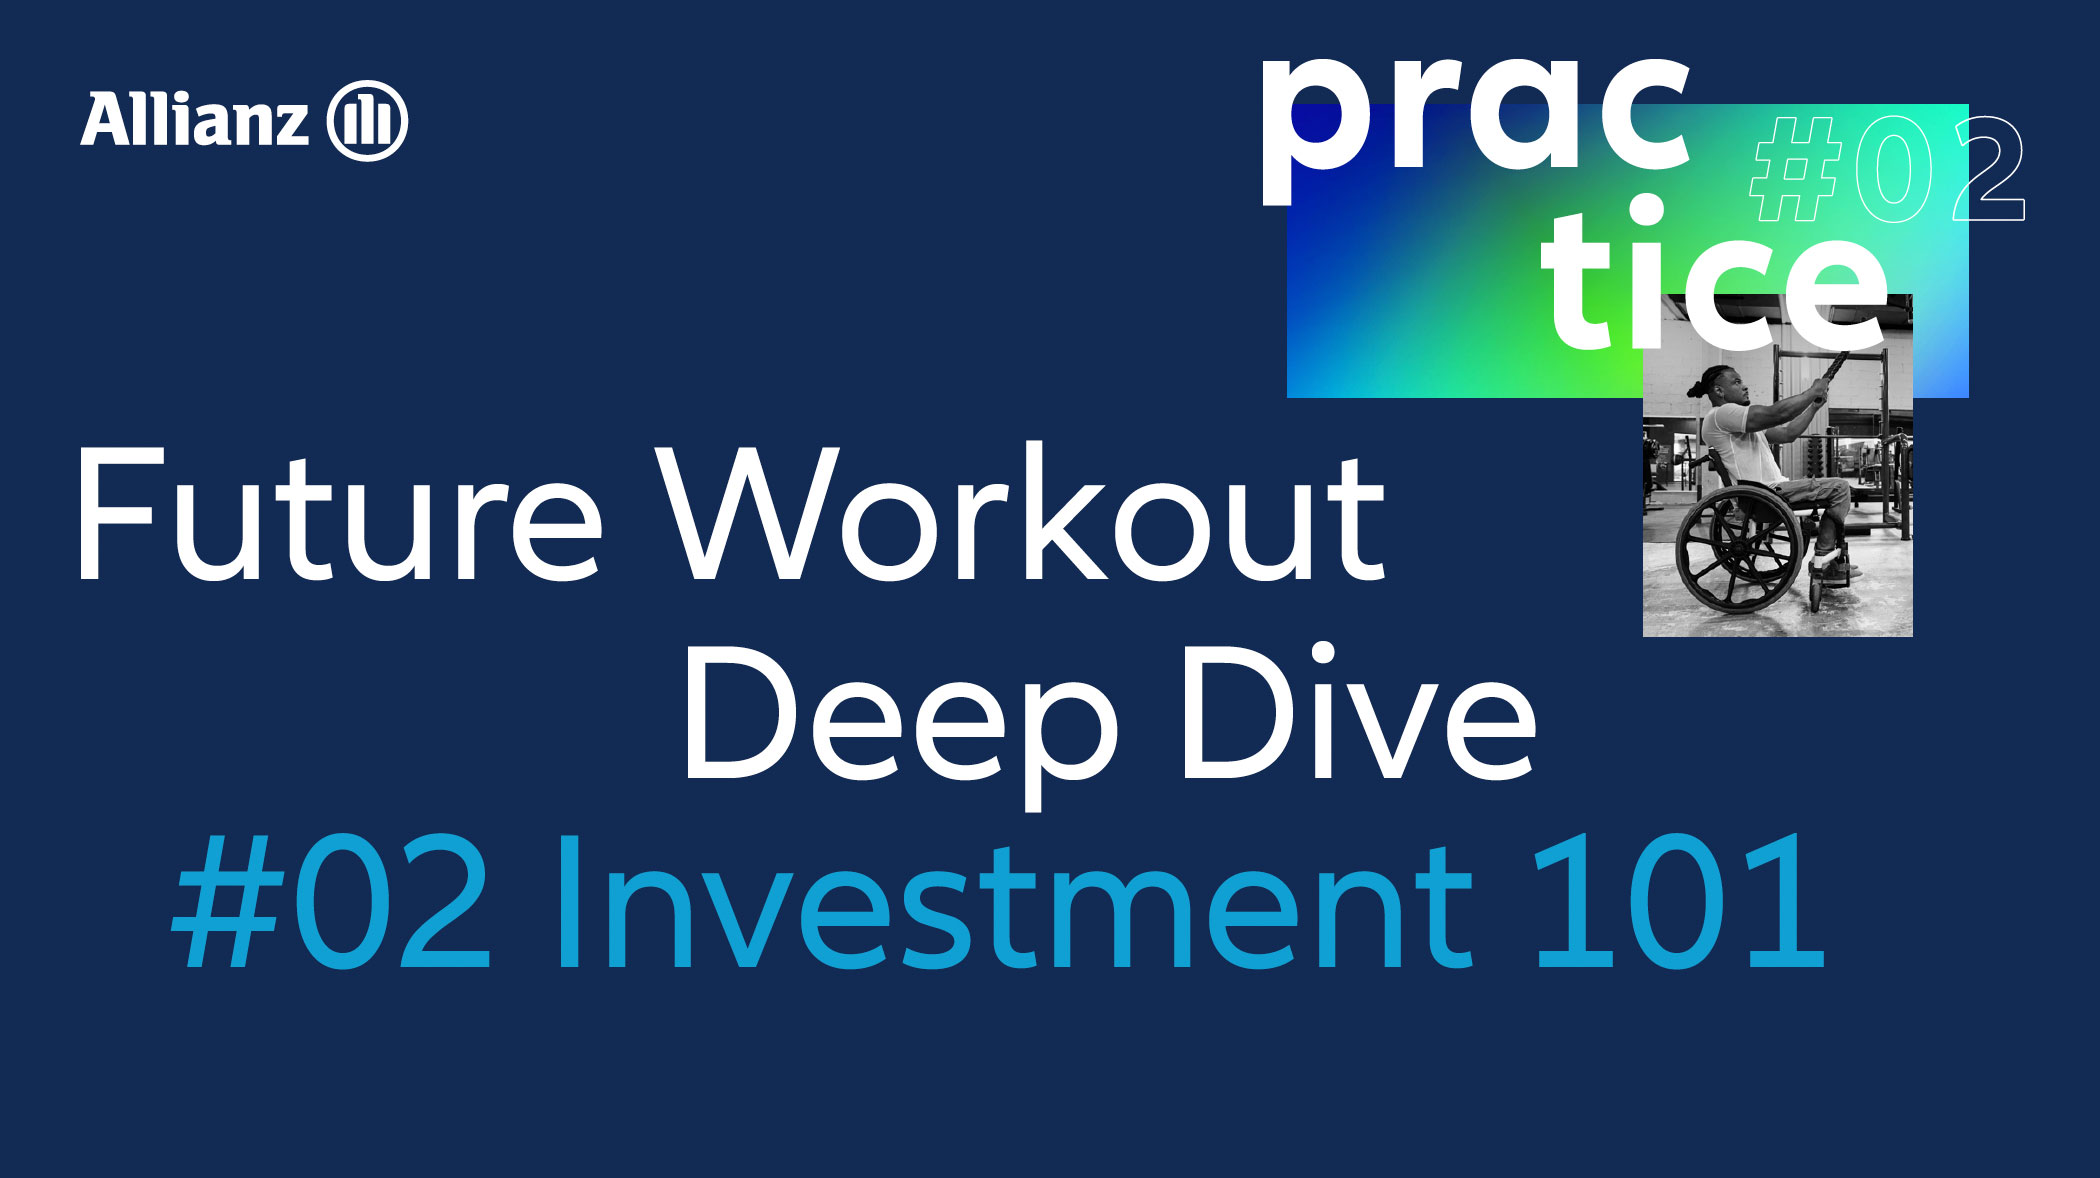 PDF title cover saying Future Workout Deep Dive #02 Investment 101